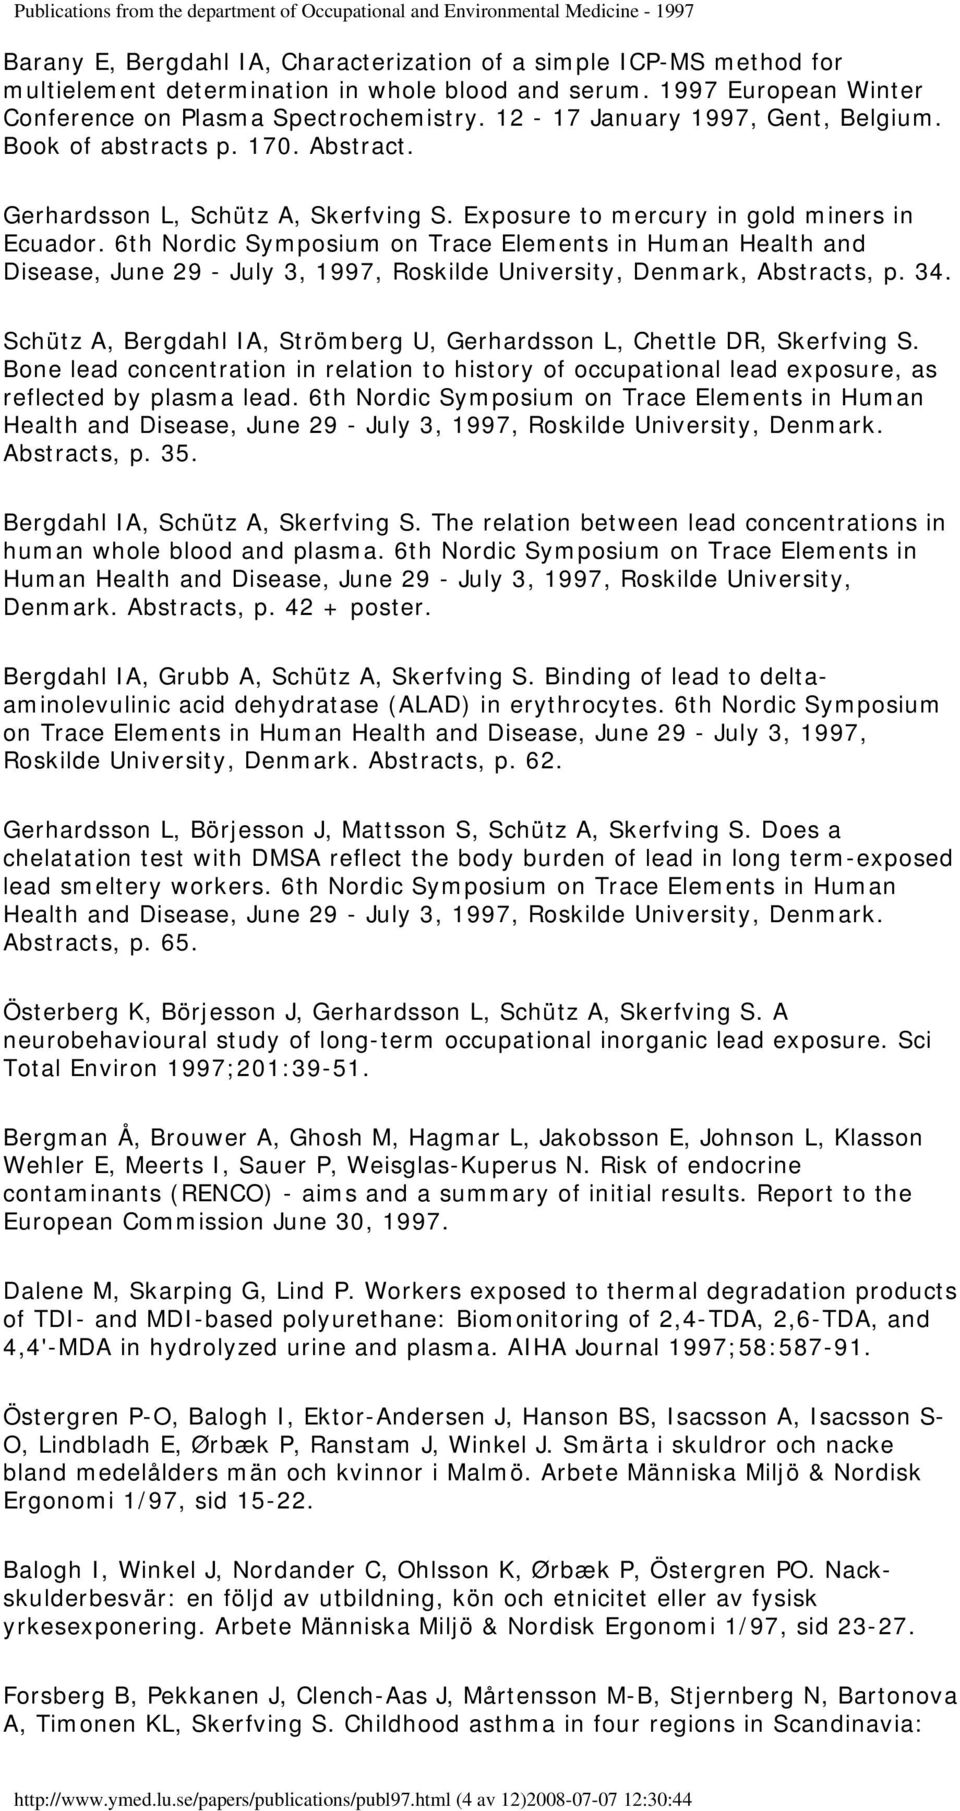 6th Nordic Symposium on Trace Elements in Human Health and Disease, June 29 - July 3, 1997, Roskilde University, Denmark, Abstracts, p. 34.